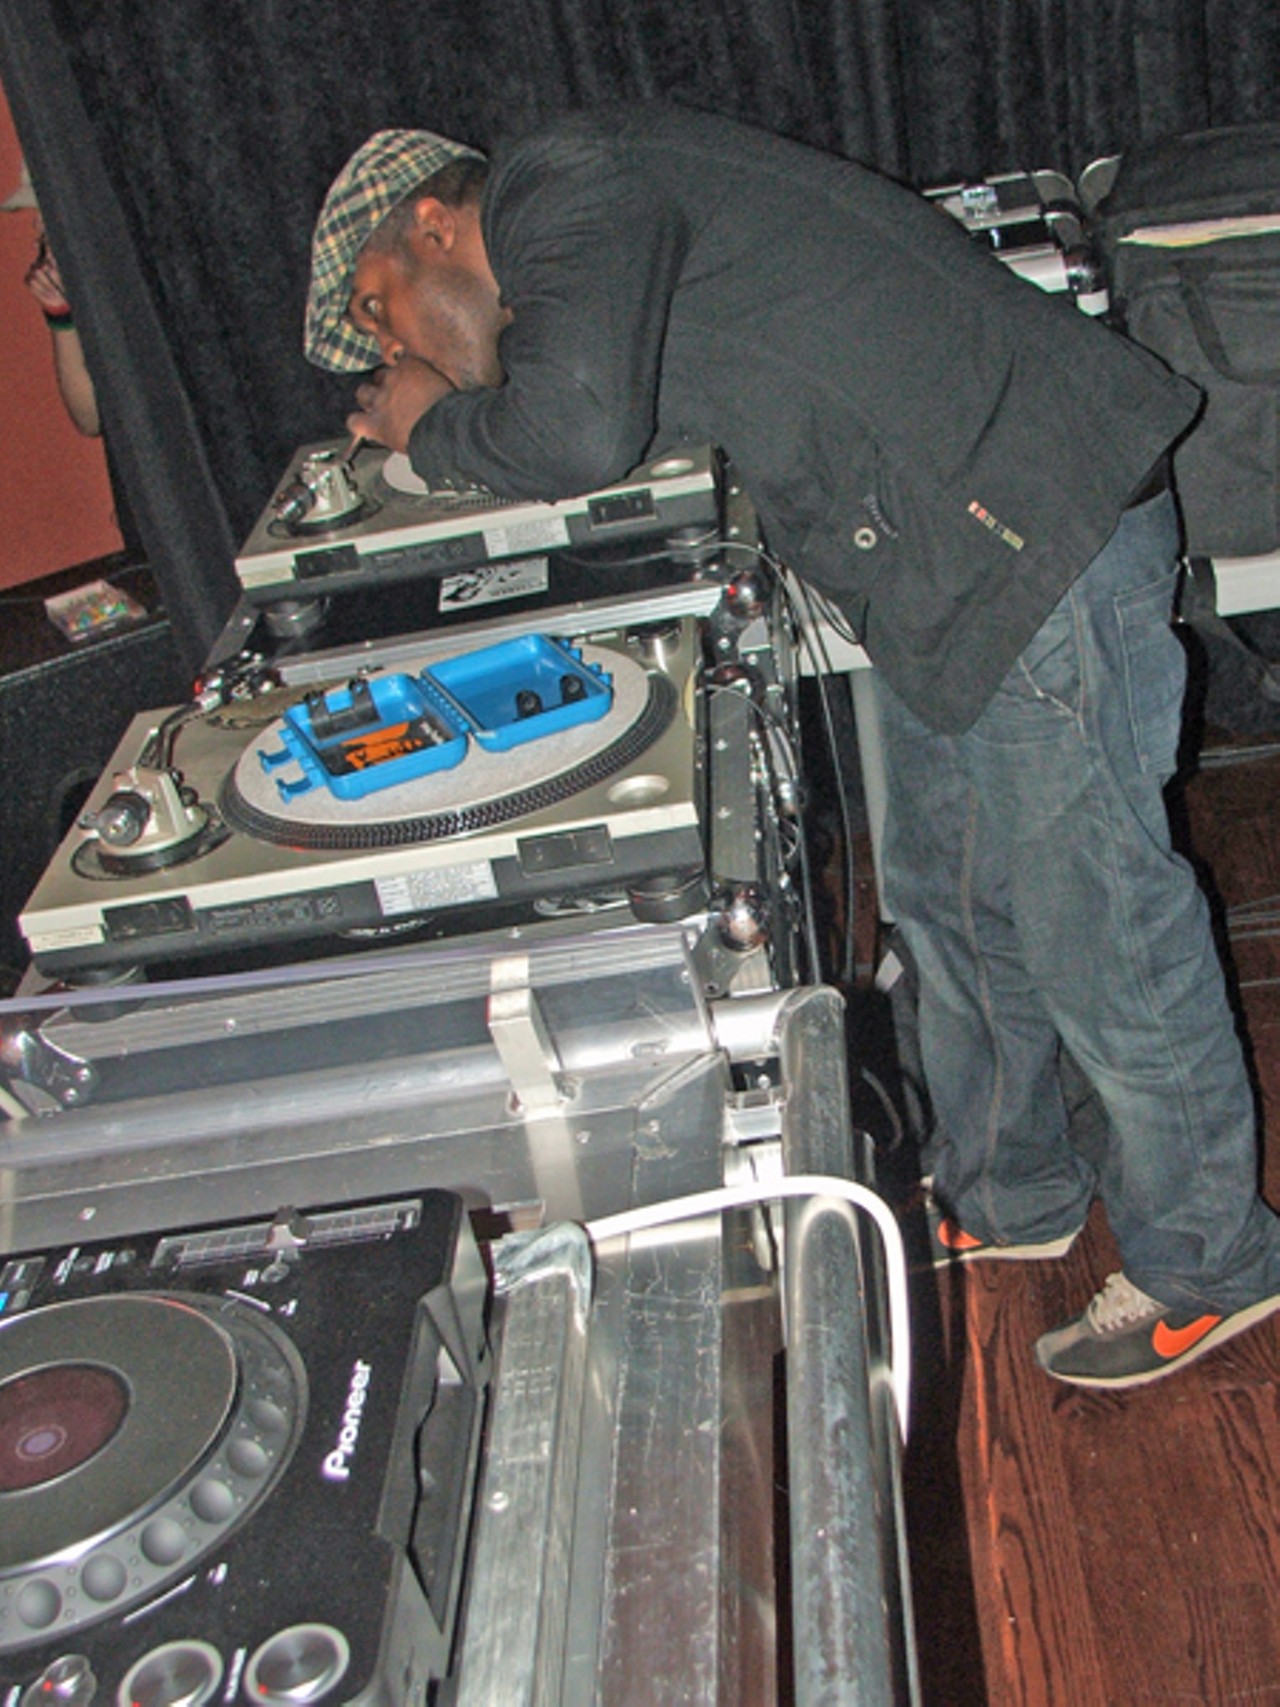 St. Louis' DJ Needles preps his turntables about 9:59 p.m. Thursday. A line waits outside for the doors to open.